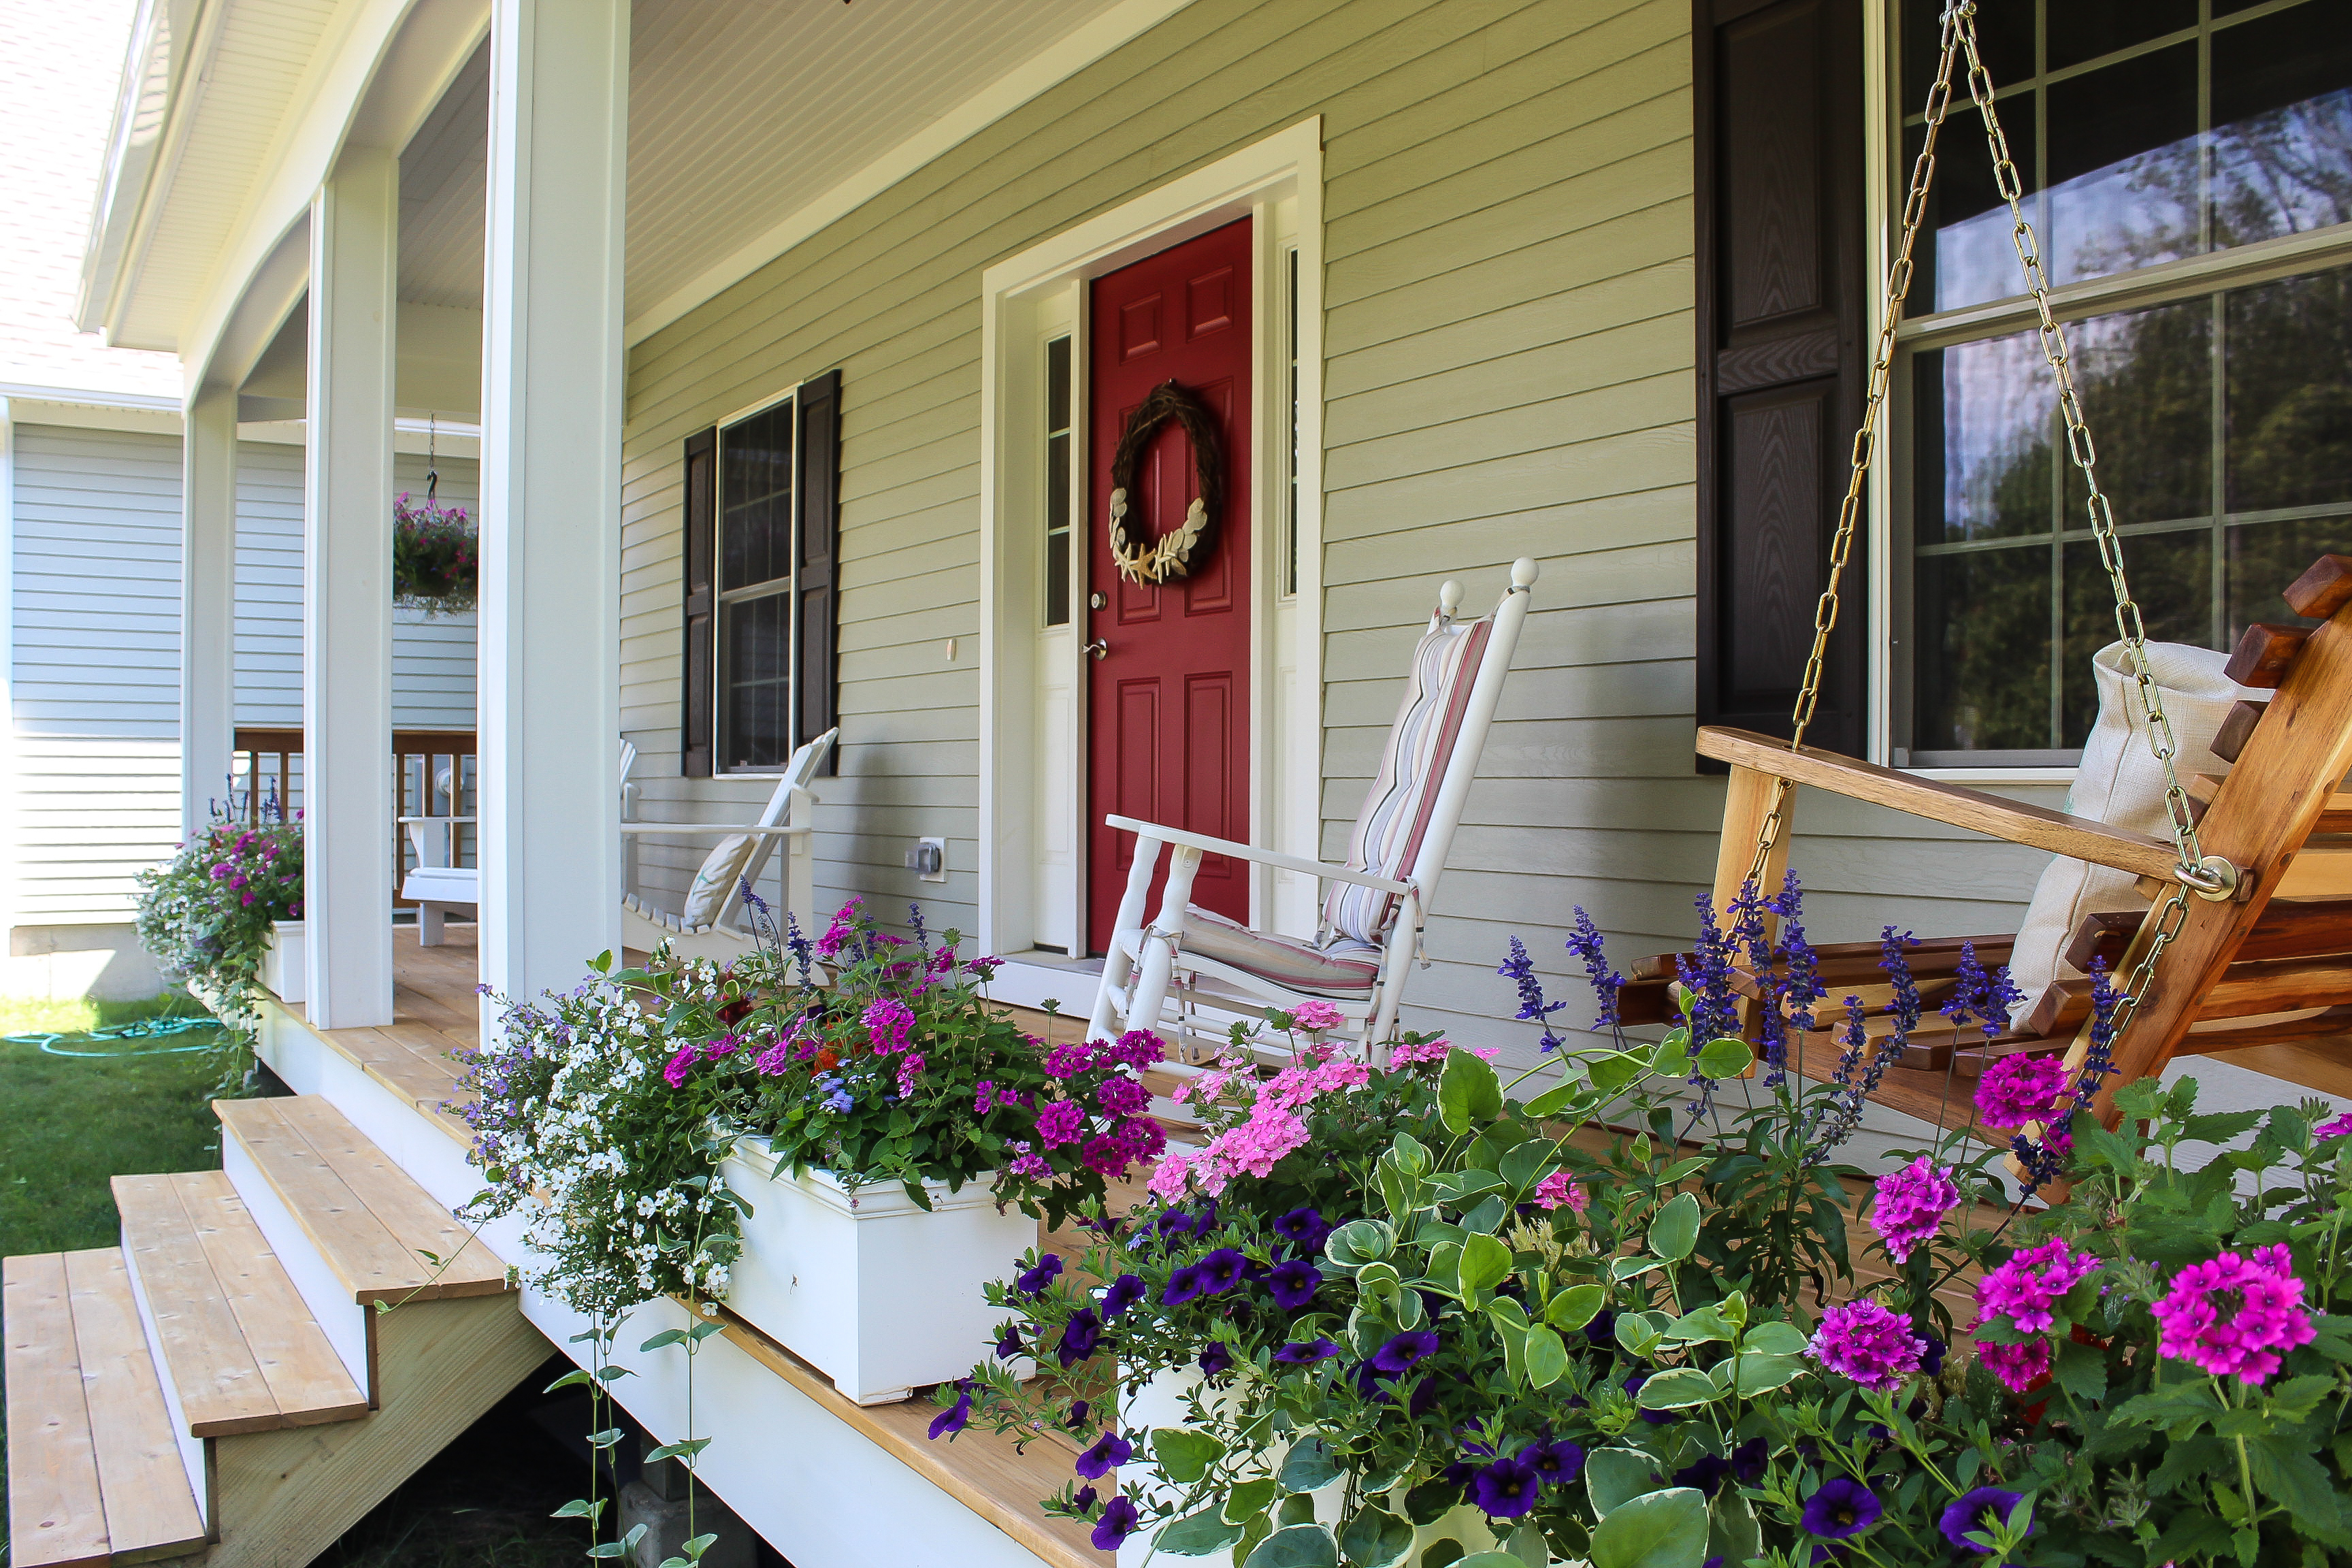 6 Tips to Boost Your Home's Curb Appeal